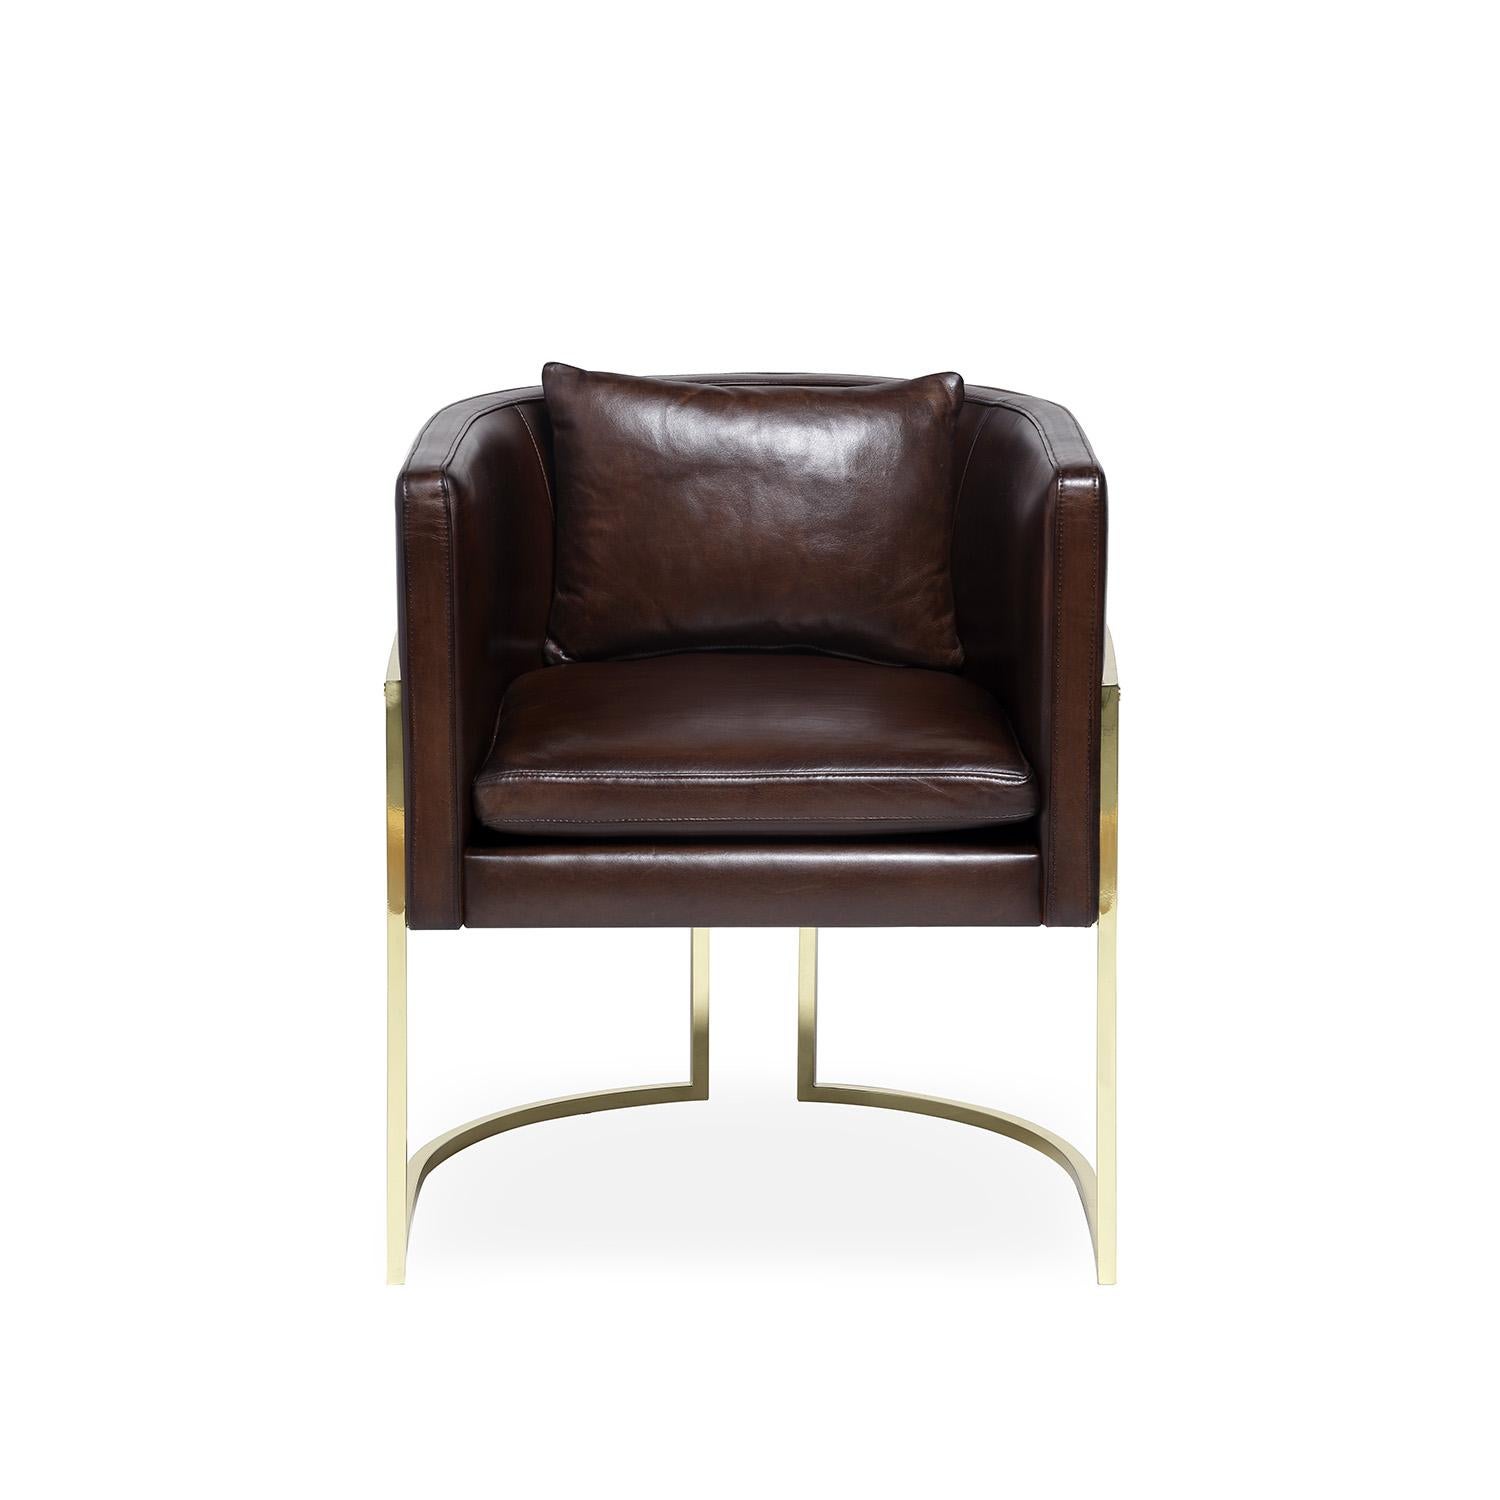 Leather and Brass Julius Chair by Duistt
Dimensions: W 62 x D 62 x H 71 cm
Materials: Leather and Brass

The JULIUS chair, crafted with great attention to detail, features clean and modern lines always with a strong craftsmanship presence like the